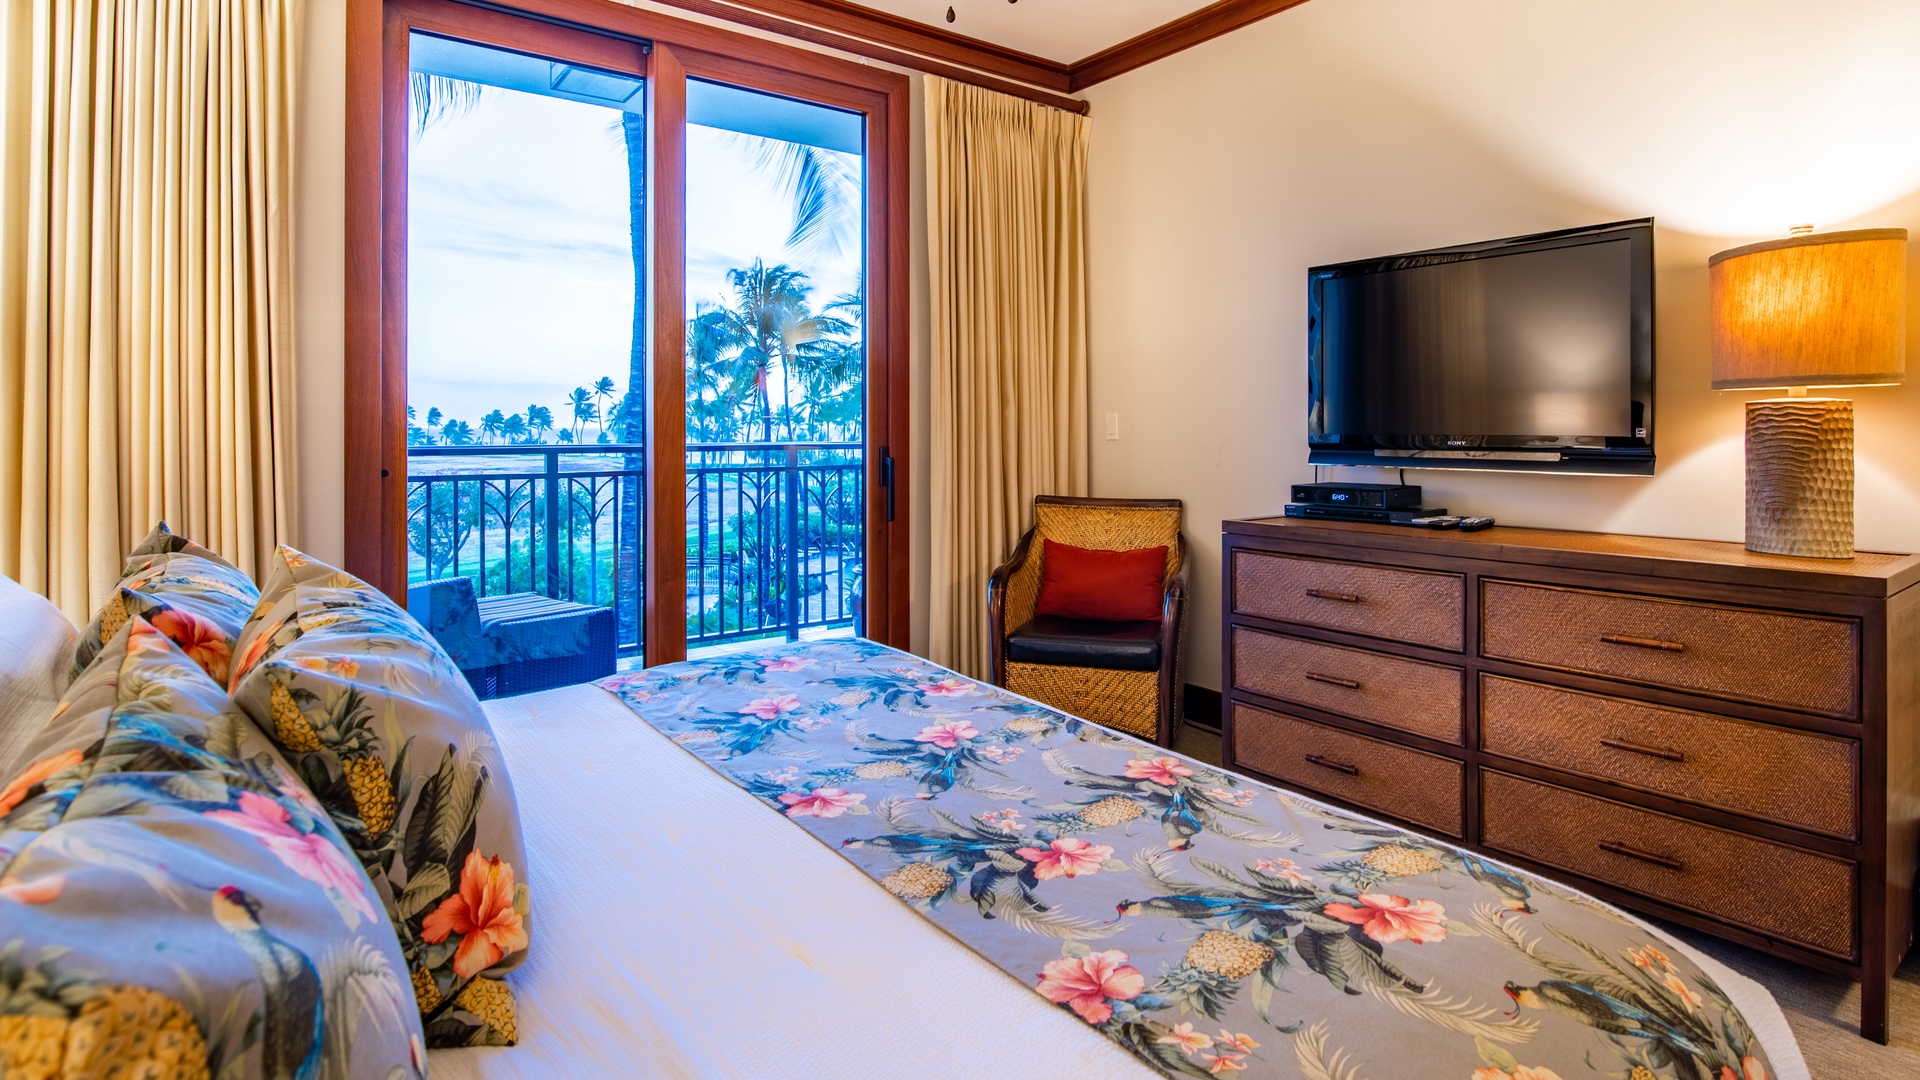 Kapolei Vacation Rentals, Ko Olina Beach Villas B301 - The second guest bedroom with views for days and a TV for your favorite shows.